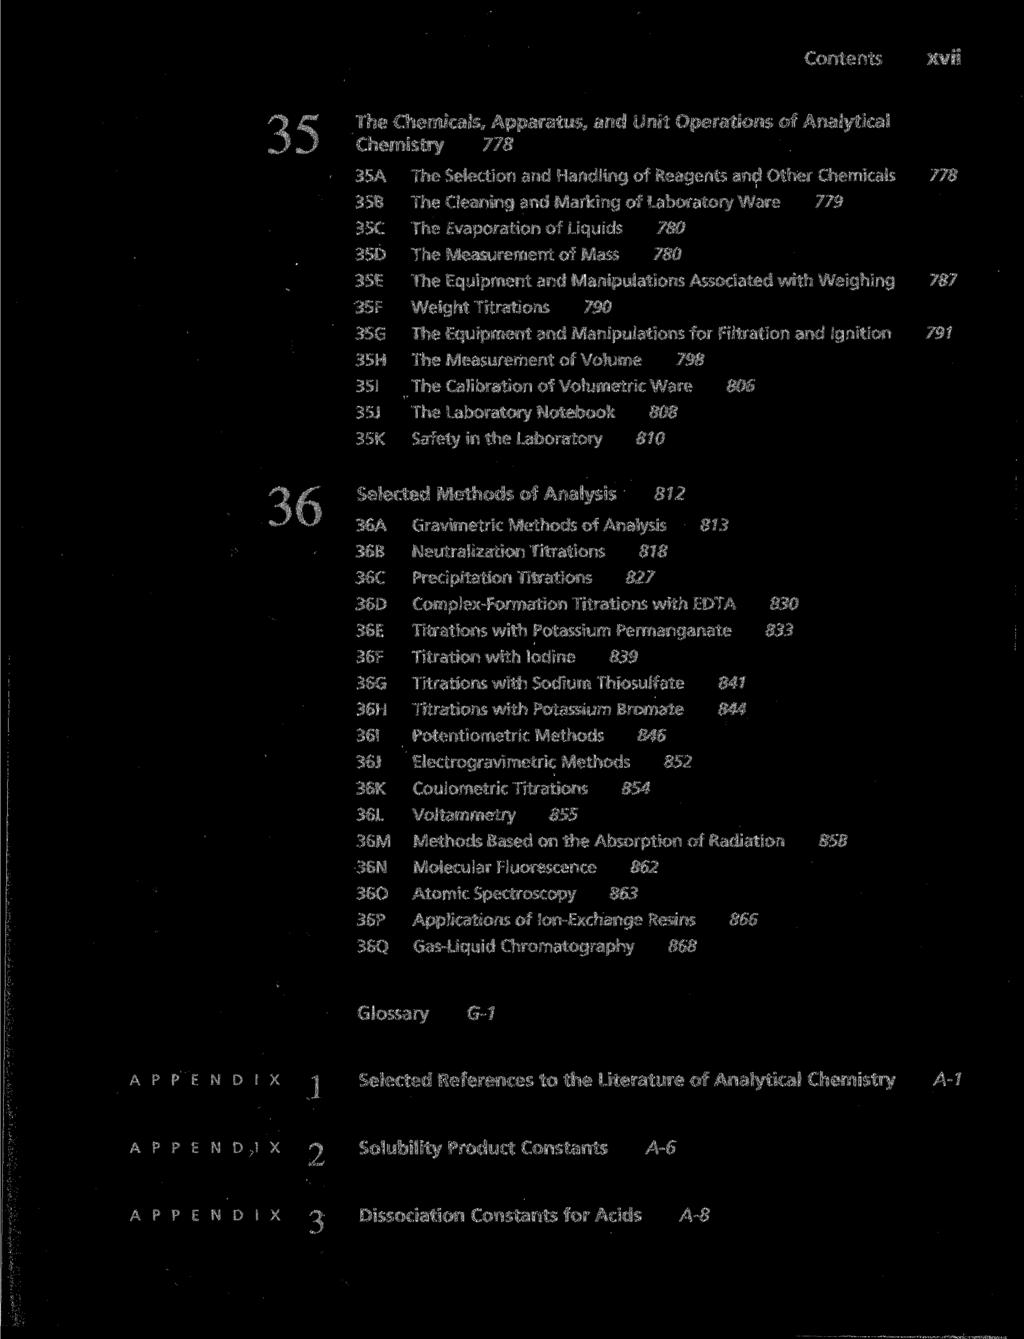 Contents xvii 1^ 1 I 36 The Chemicals, Apparatus, and Unit Operations of Analytical Chemistry 778 35A The Selection and Handling of Reagents and Other Chemicals 778 35B The Cleaning and Marking of